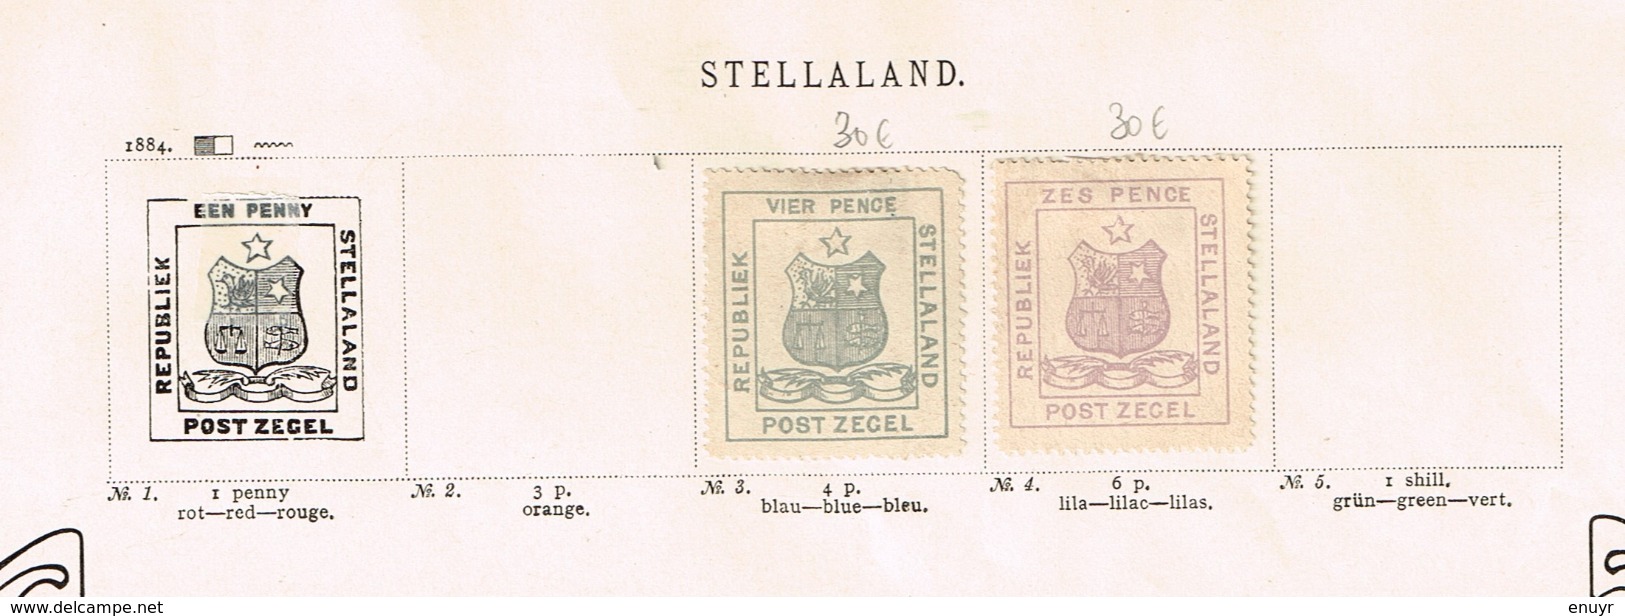 Transvaal -  Stellaland. Ancienne collection. Old collection. Altsammlung. Oude verzameling.